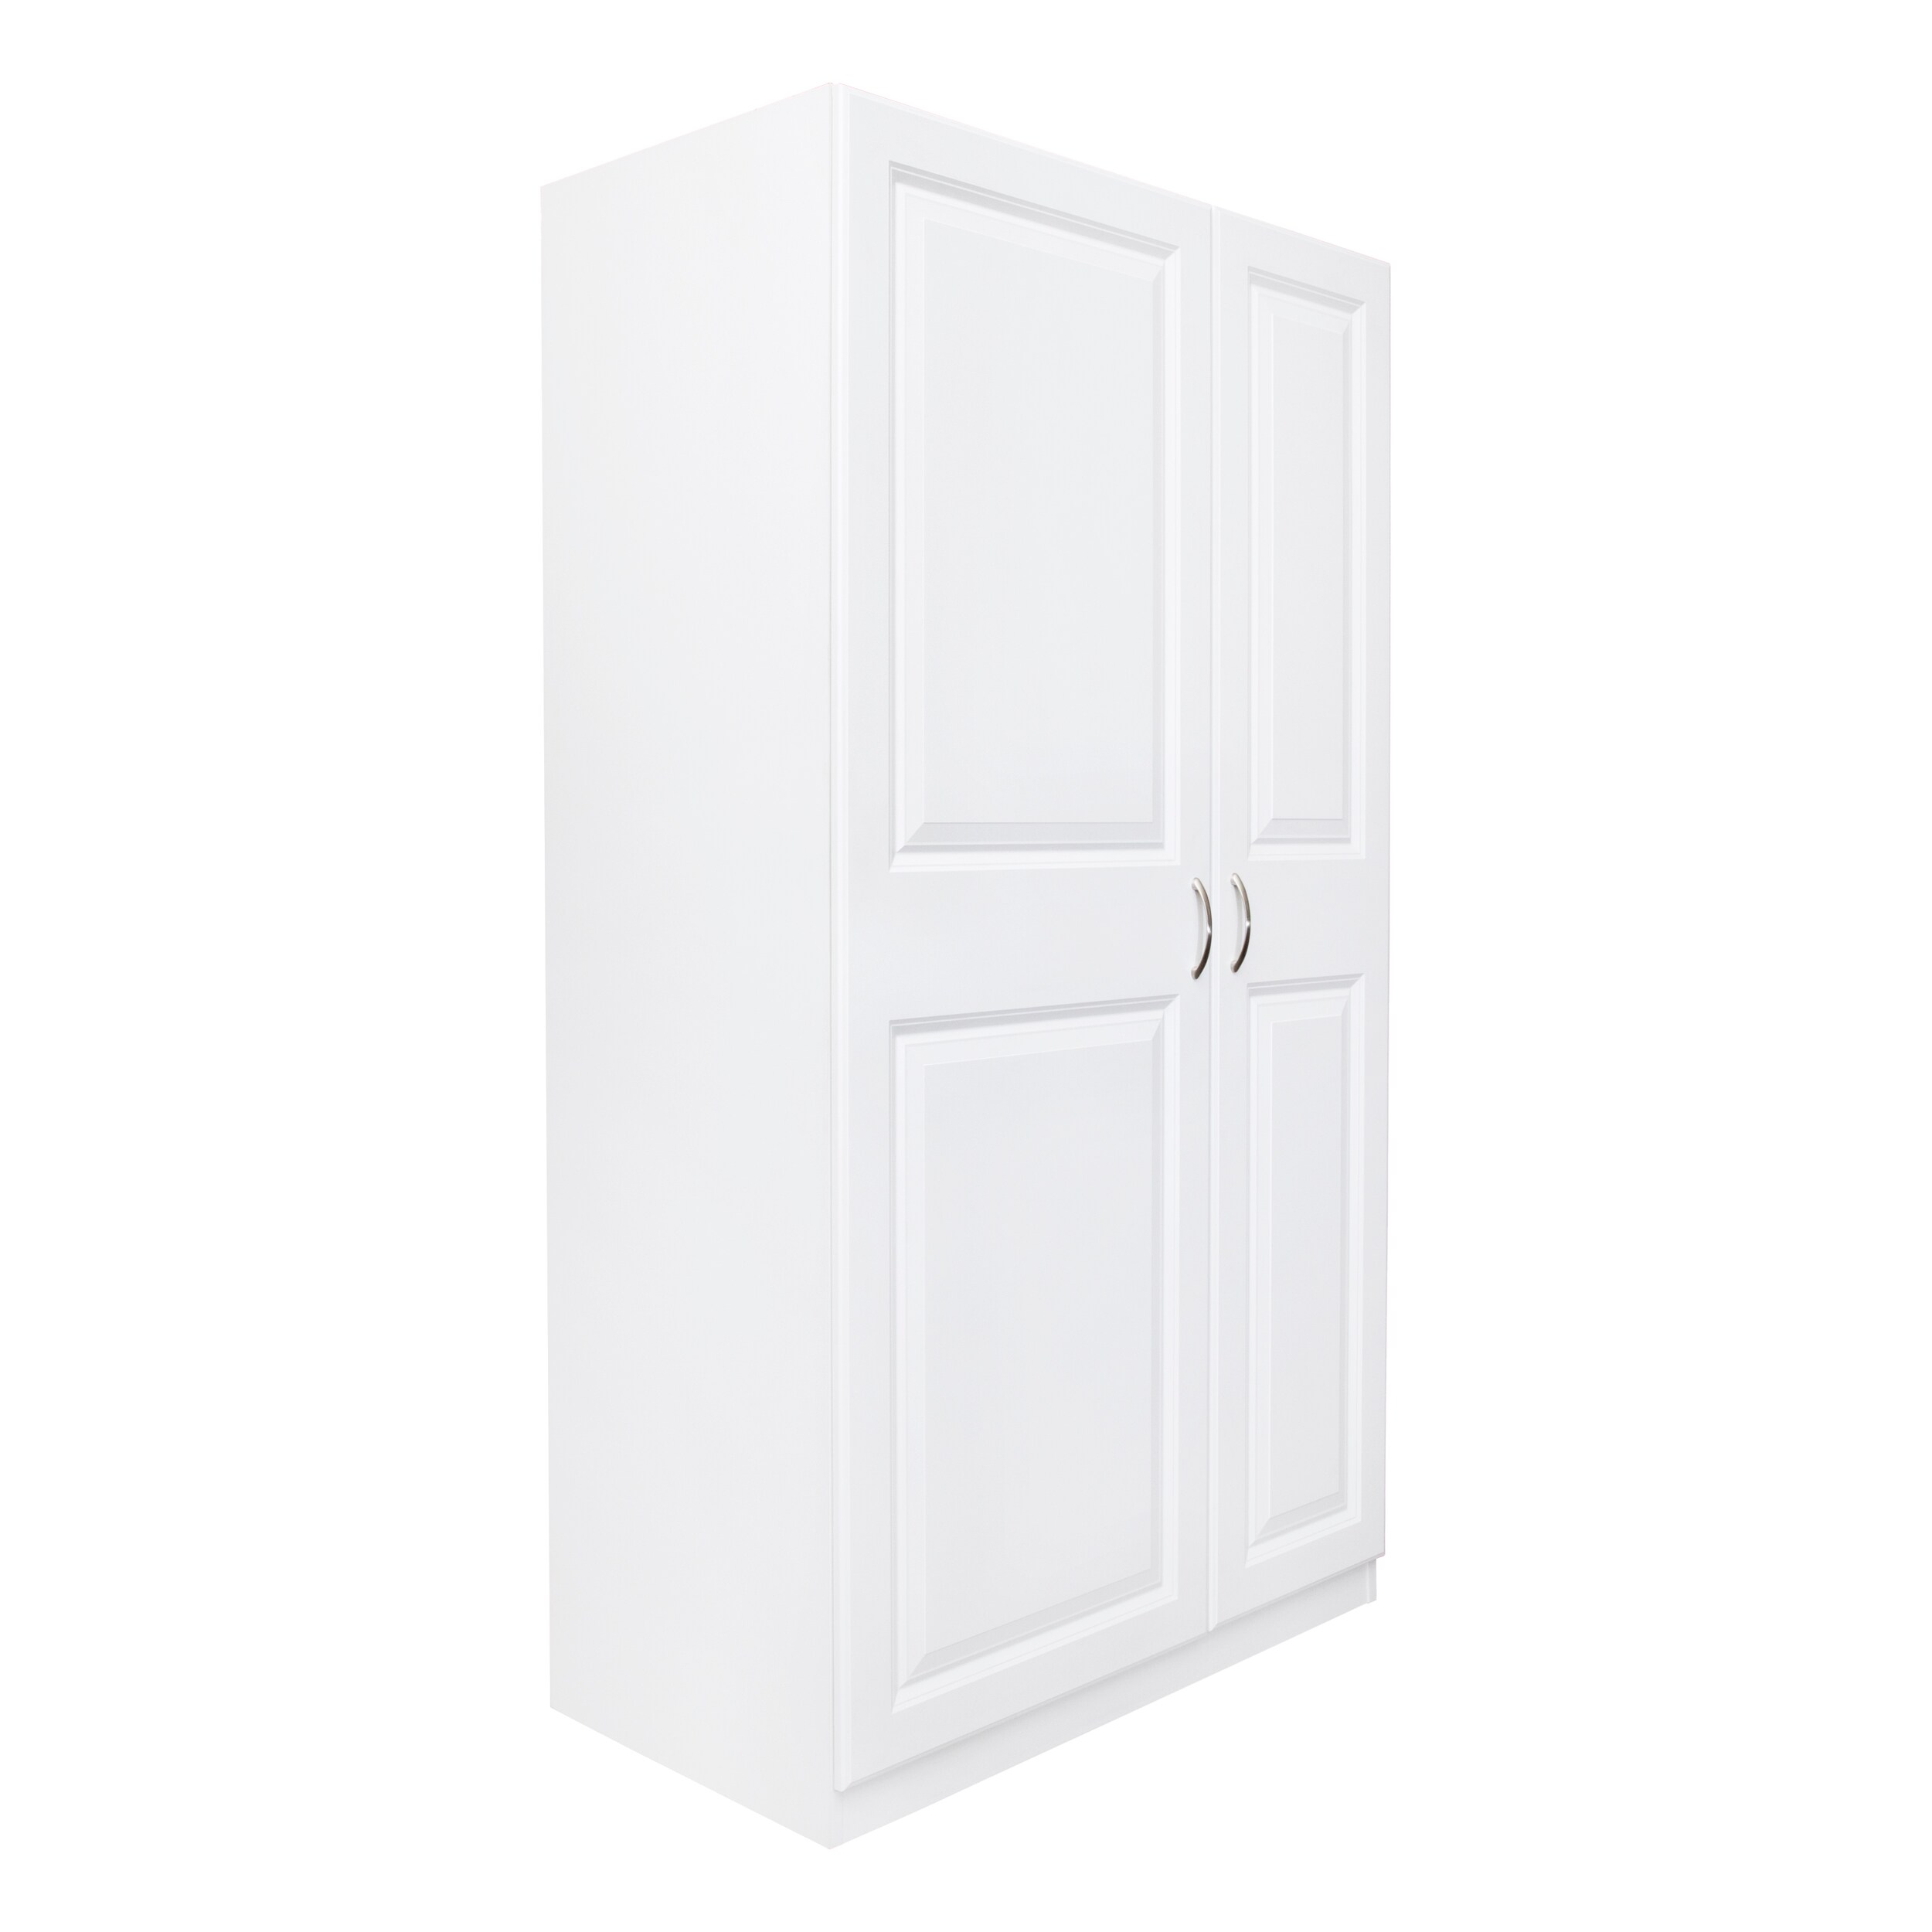 Utility Storage Cabinets at Lowes.com